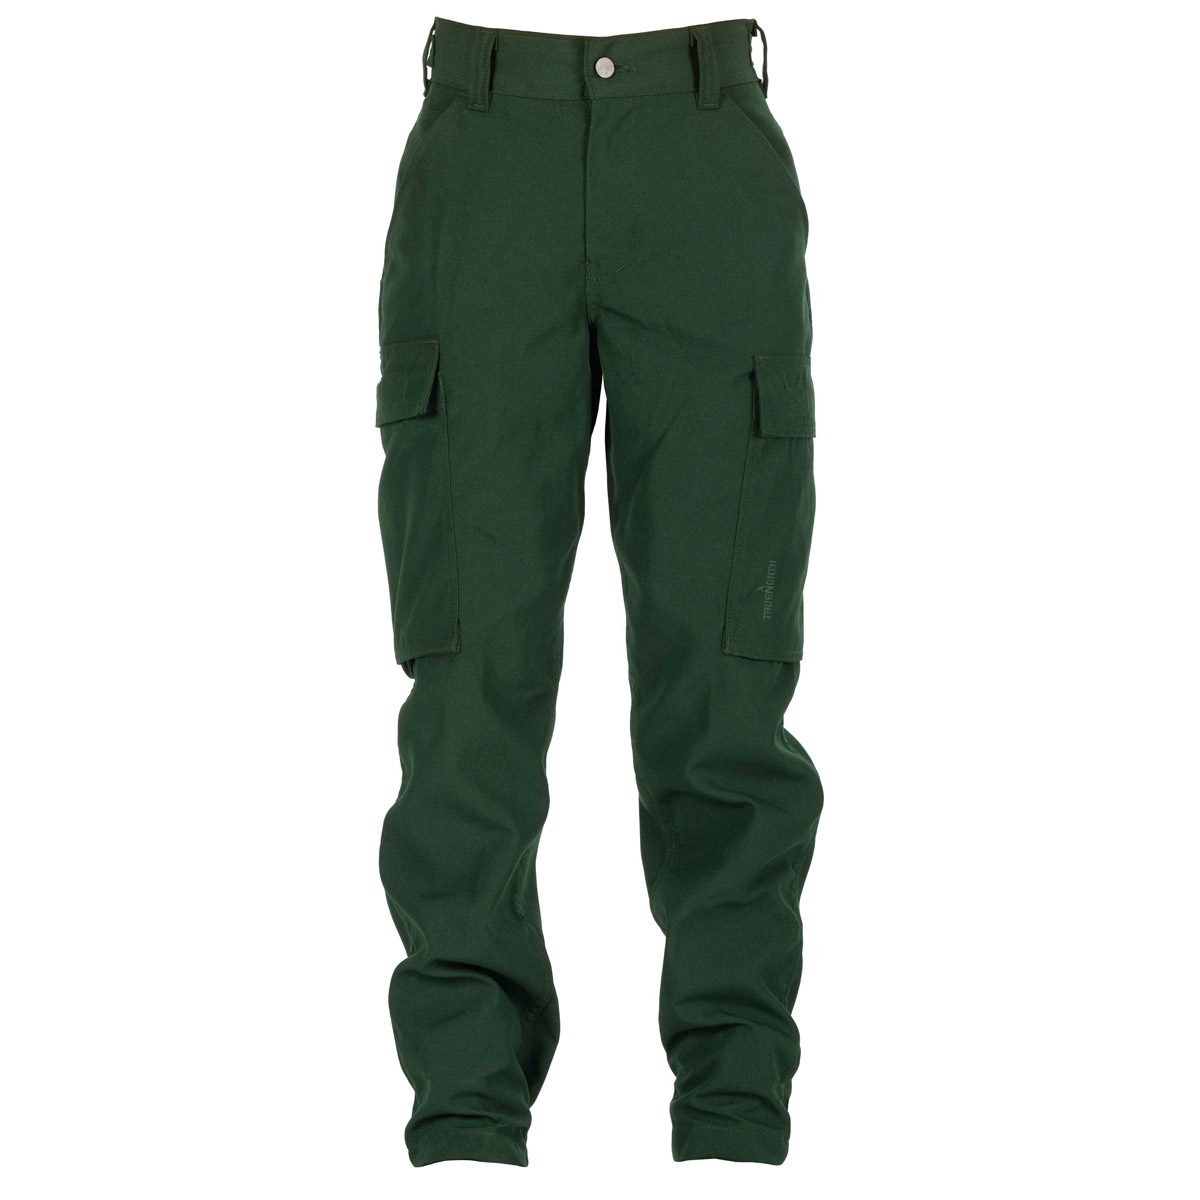 6 oz Spruce Green 42/Inseam 32 42/Inseam 32 TOPPS SAFETY PA15-5675-42-32 PA15-5675 NOMEX Widland Pants